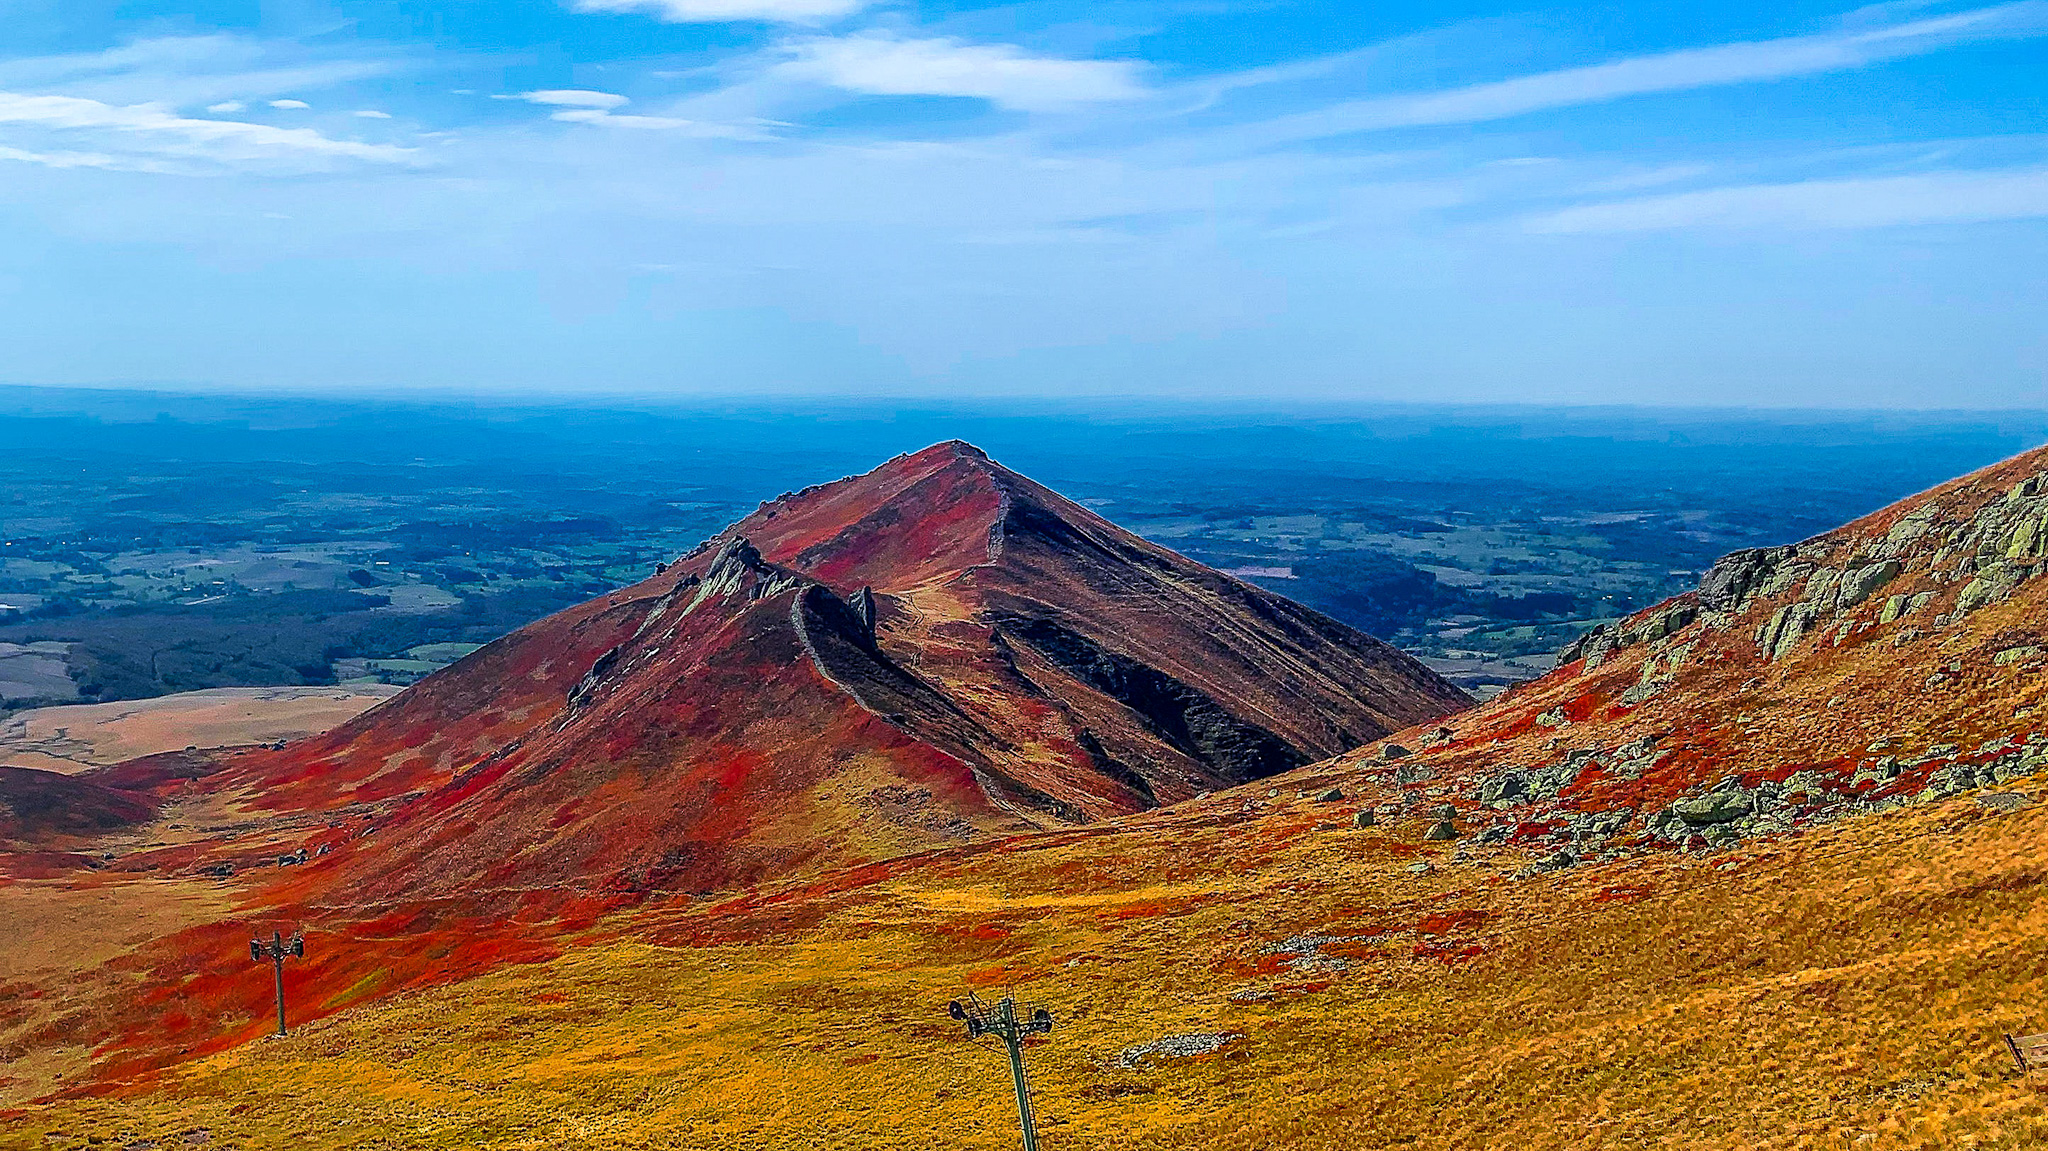 Puy Gros in its Autumn colors